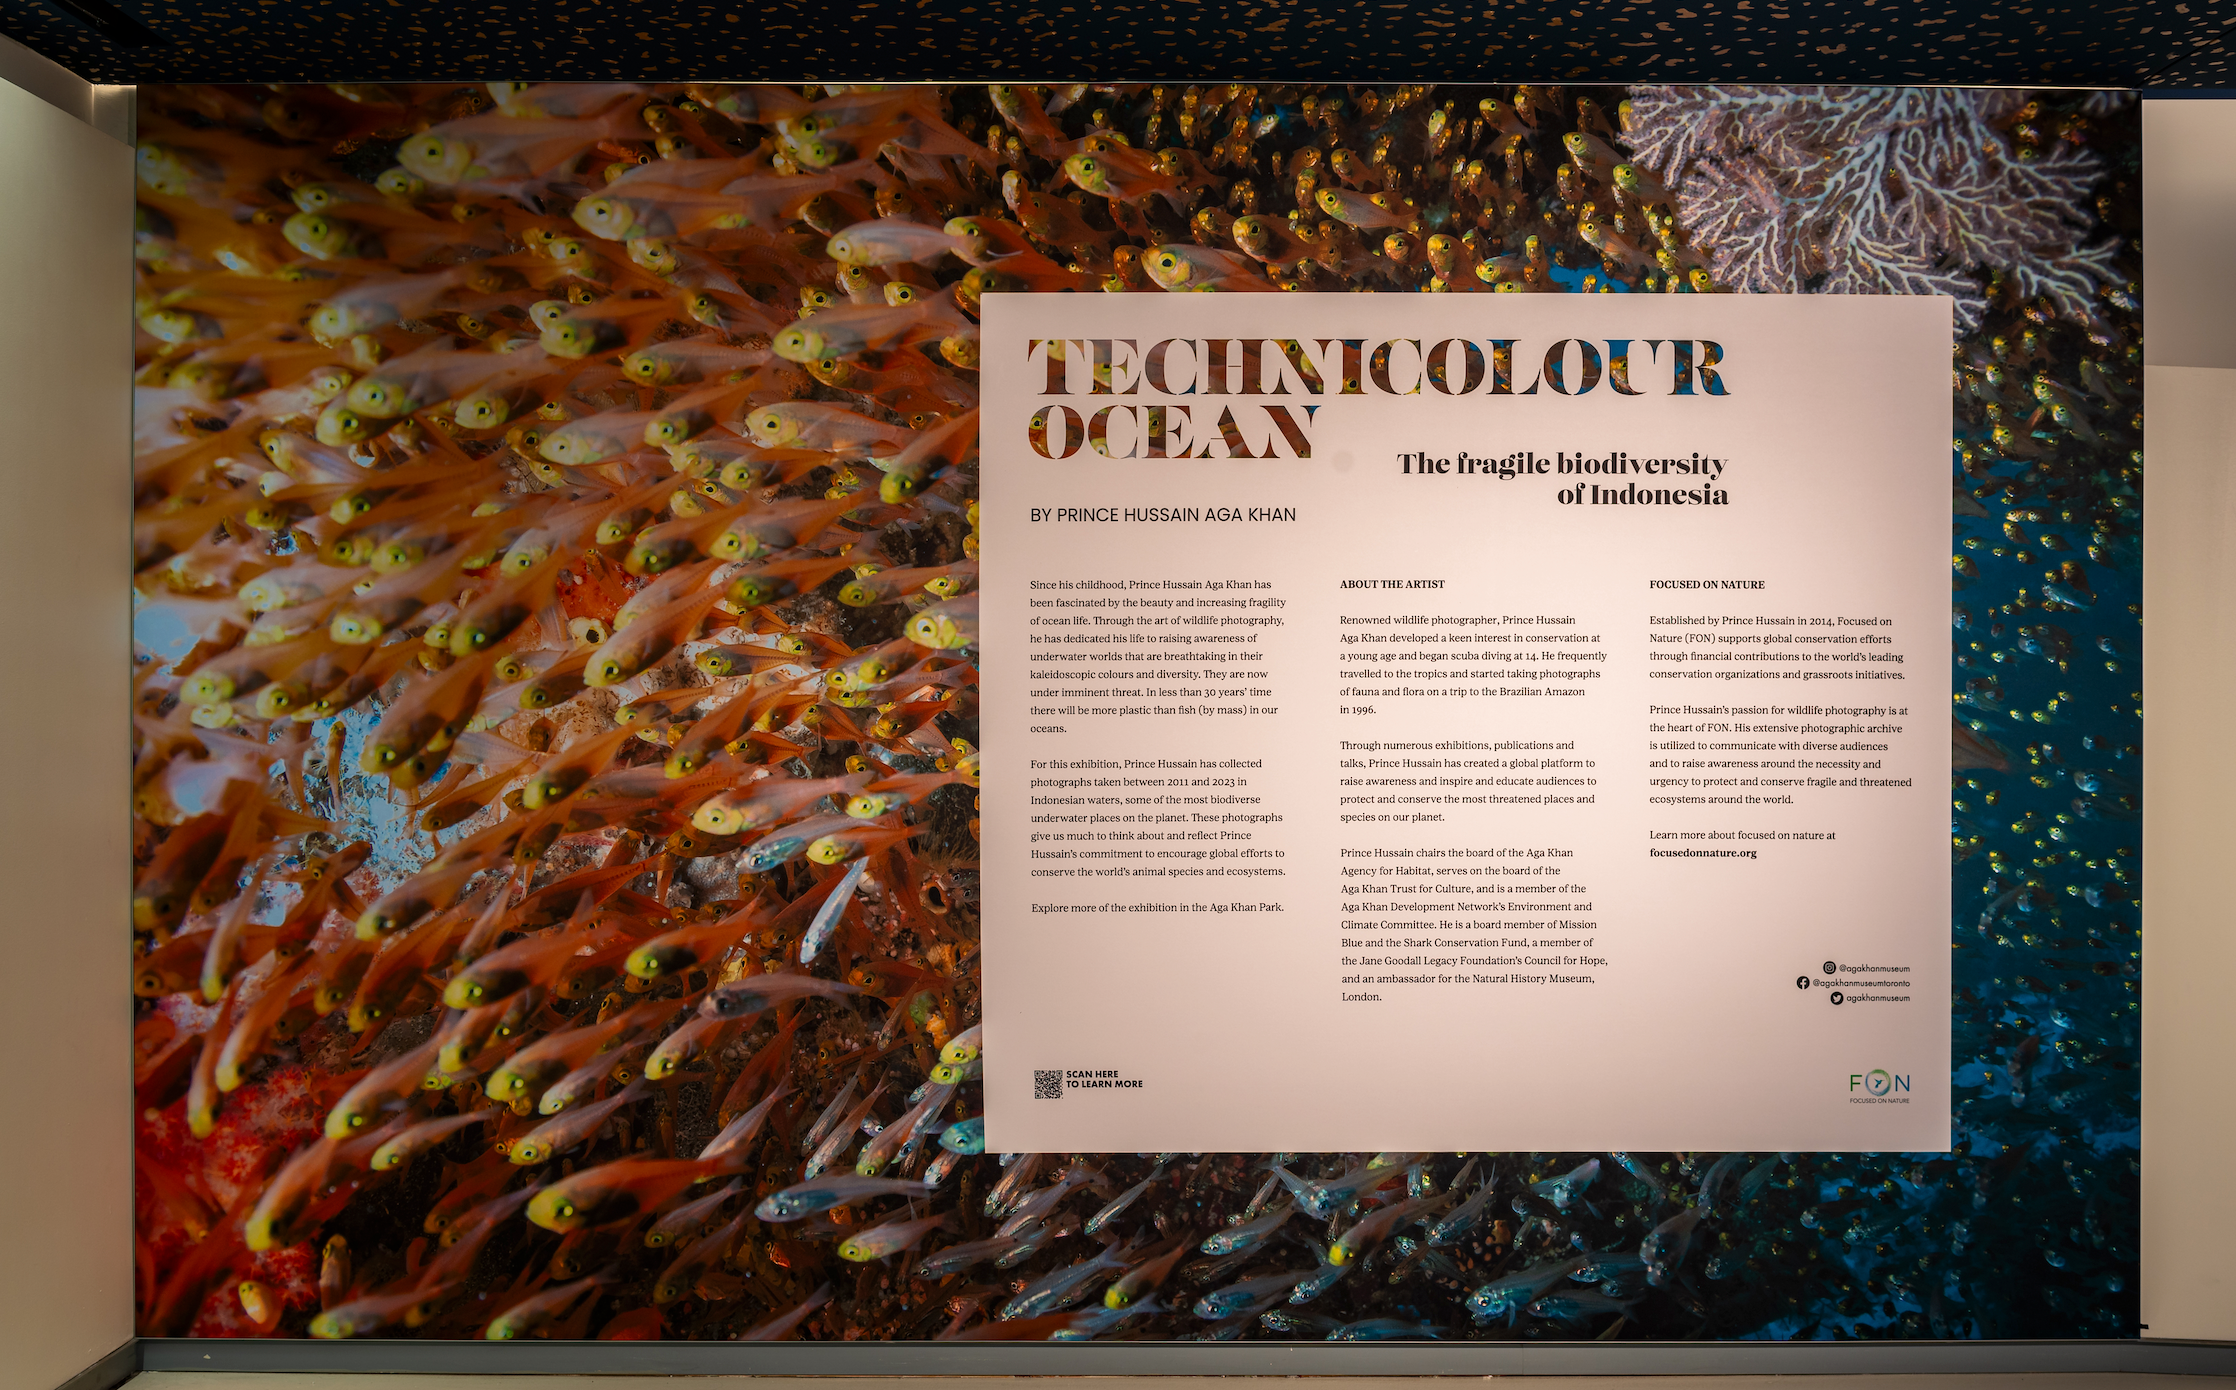 Introduction panel that show a swarm fish and in front of it information about the 'Technicolour Ocean